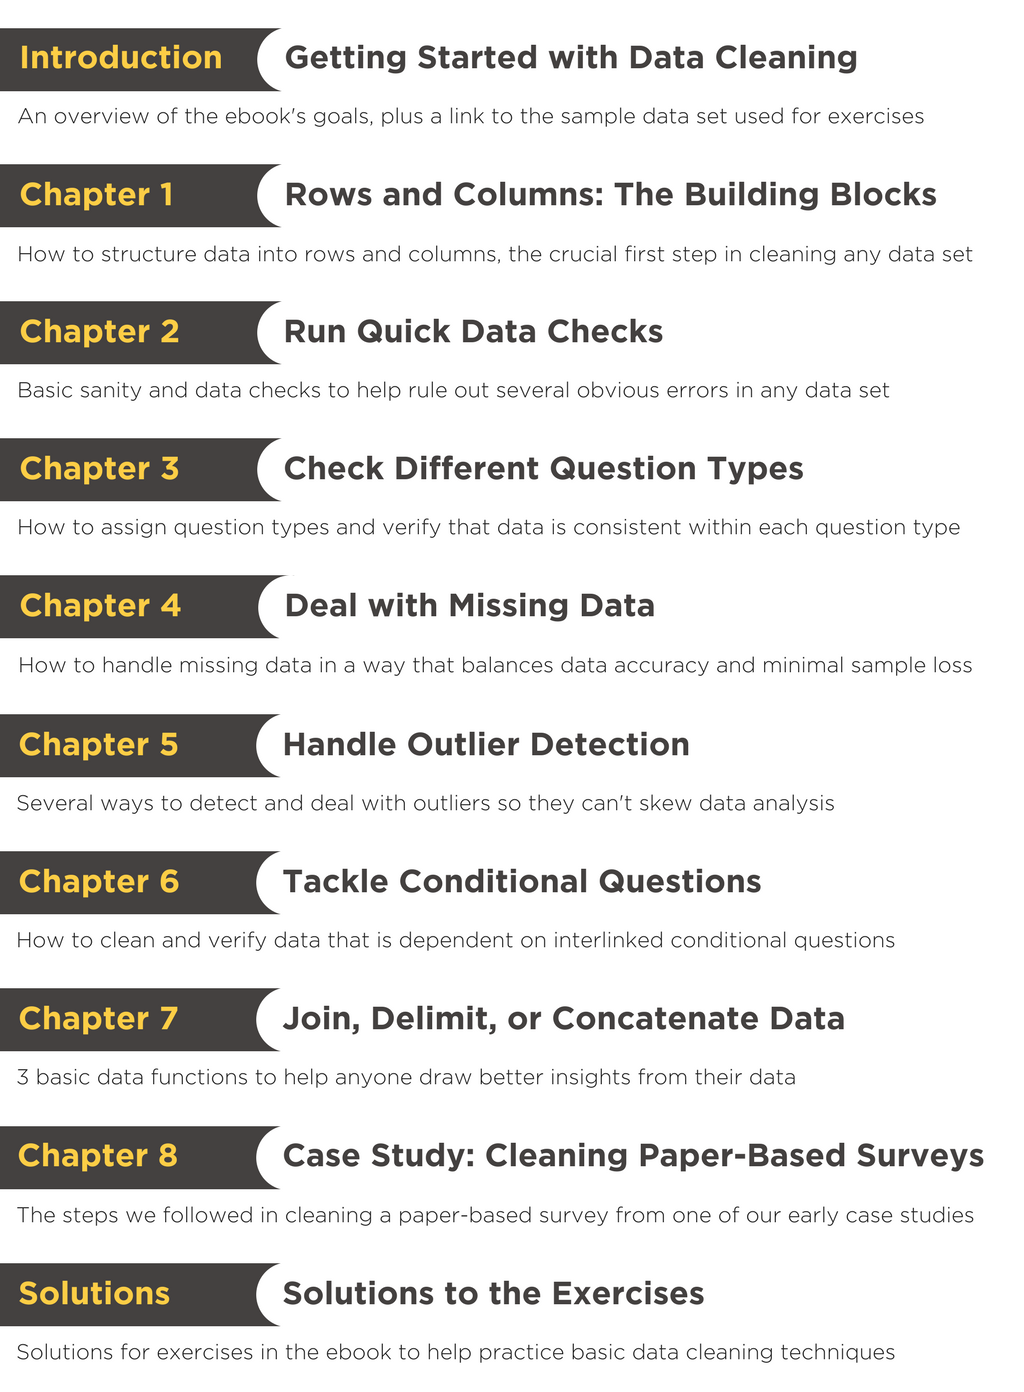 Data Cleaning Ebook Chapters: Basics of Data Cleaning, Rows & Columns, Missing Data, Conditional Questions, Outlier Detection, Delimit or Concatenate Data, Data Cleaning on Excel